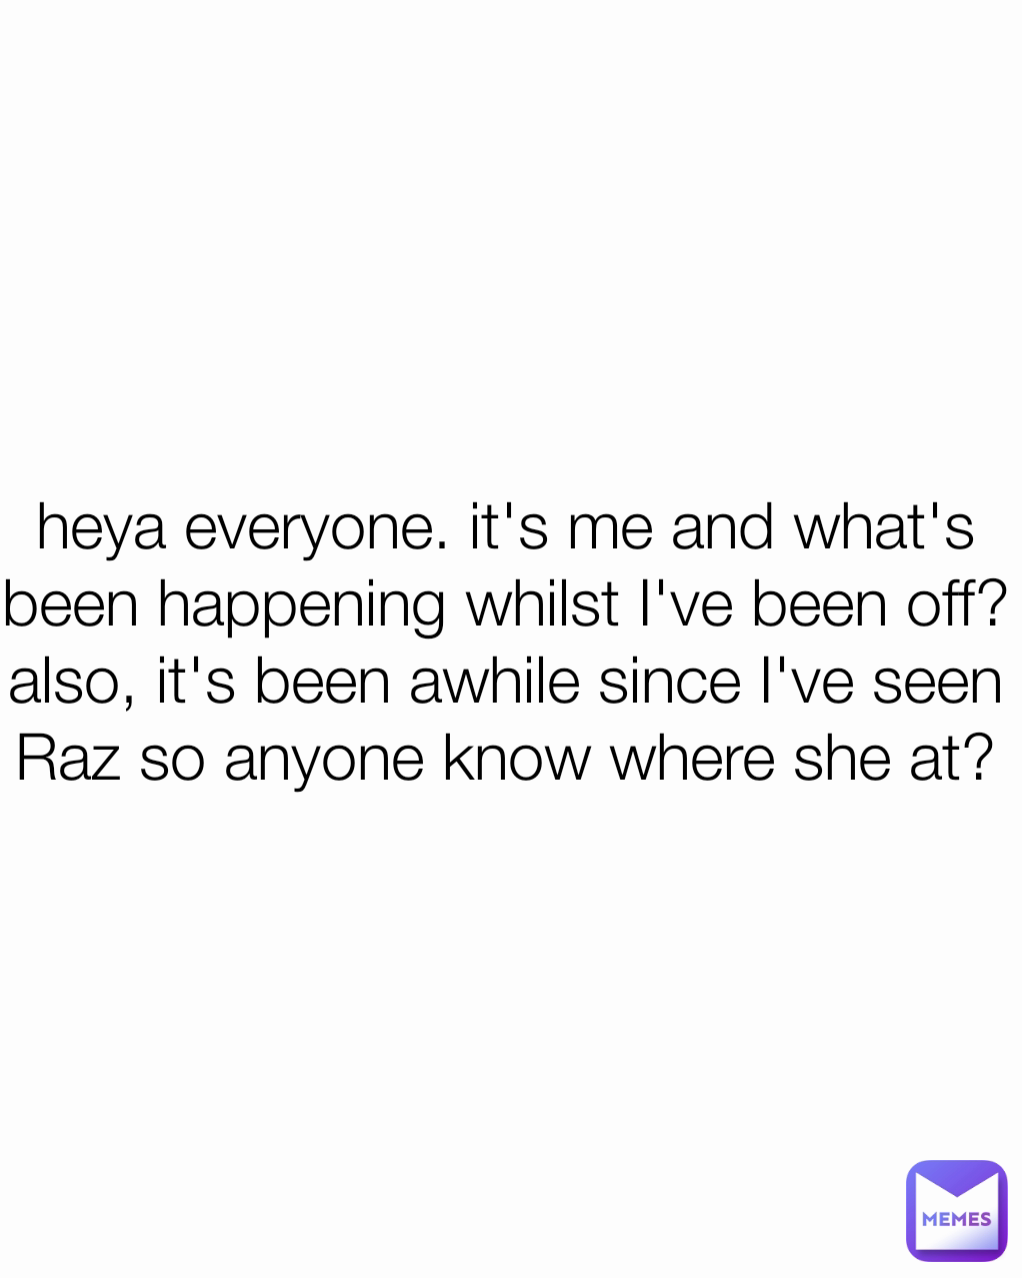 heya everyone. it's me and what's been happening whilst I've been off? also, it's been awhile since I've seen Raz so anyone know where she at?